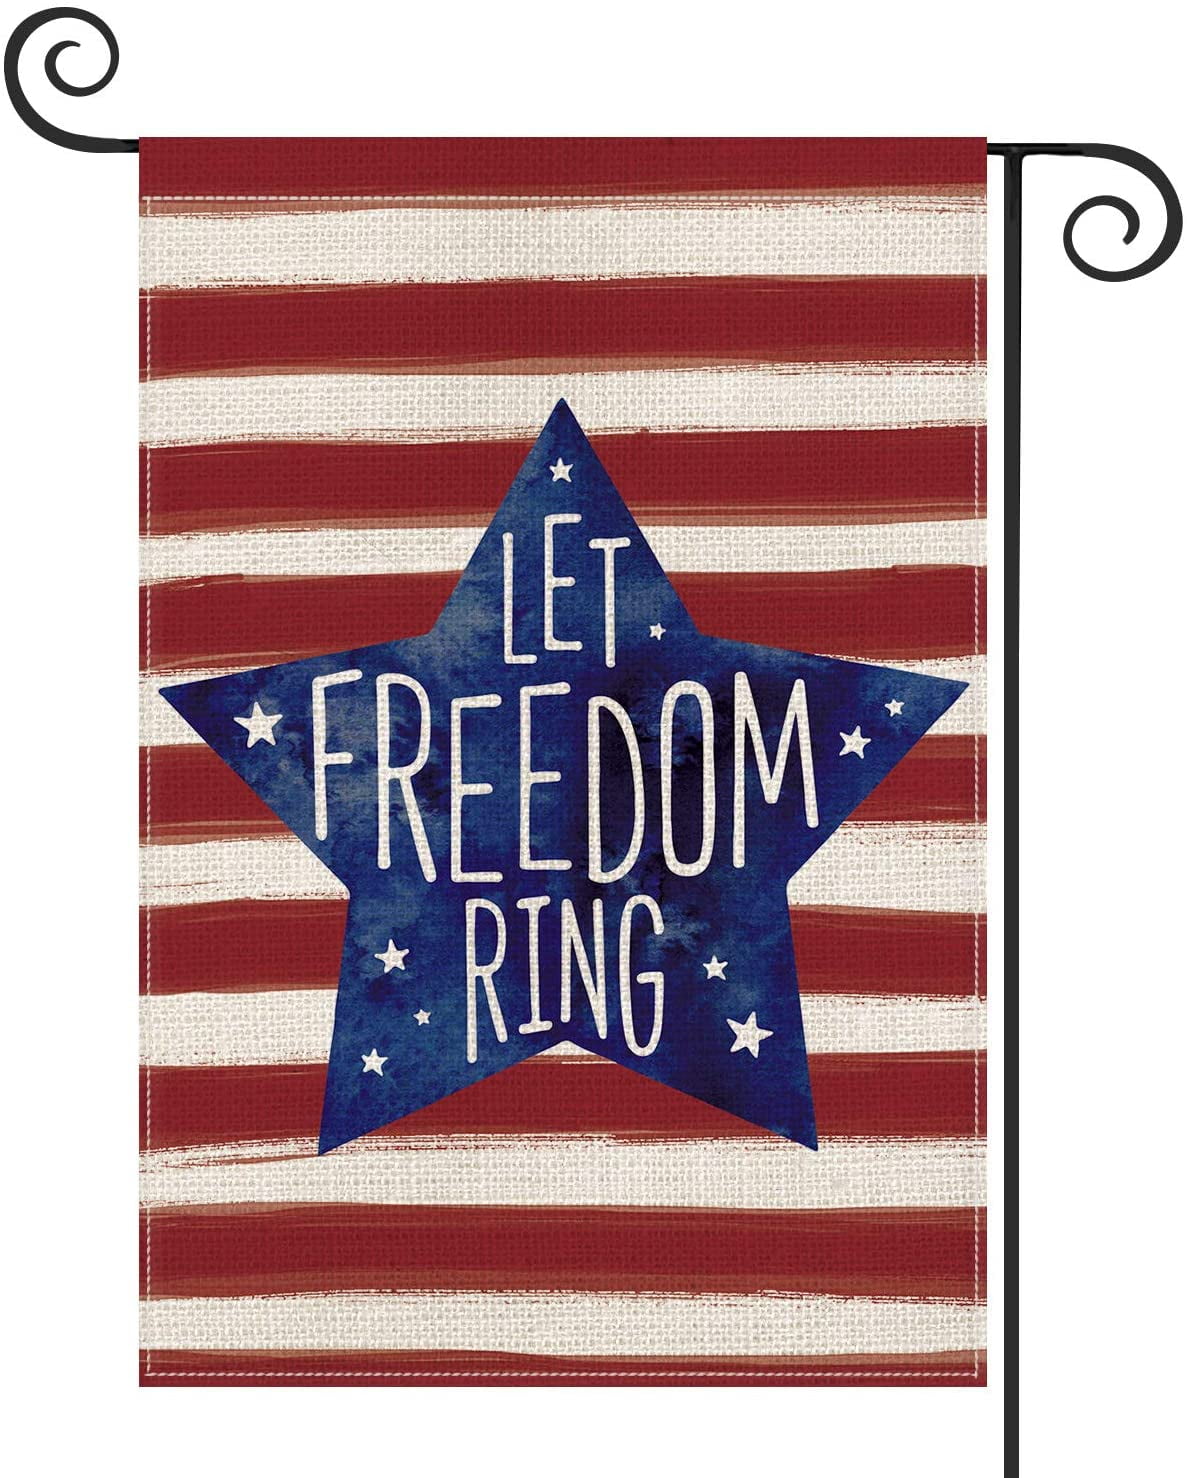 Free Ship! NEW 12.5"x18" USA/4th of July Patriotic CAMPER/PICNIC Garden Flag